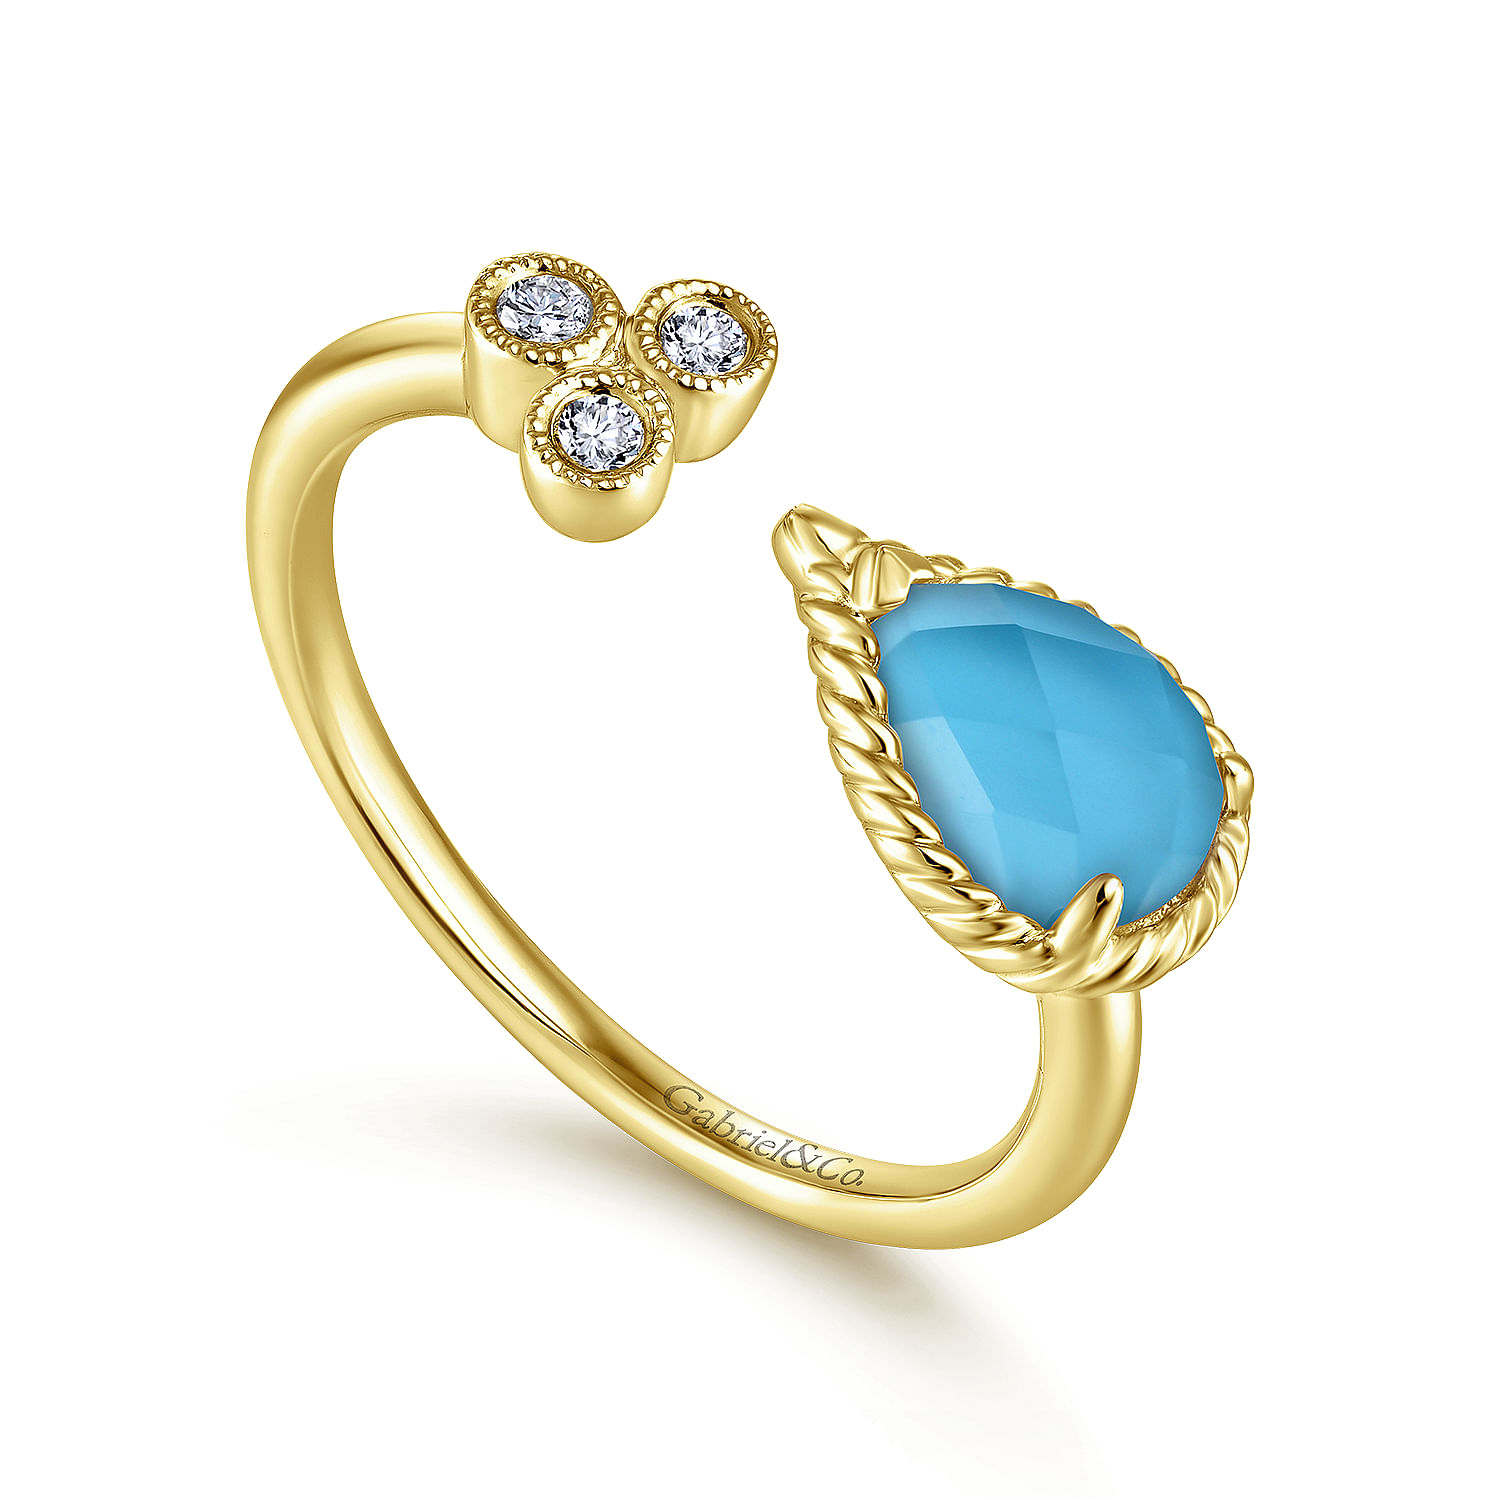 14K Yellow Gold Pear Shaped Rock Crystal/Turquoise Split Ring with Diamonds